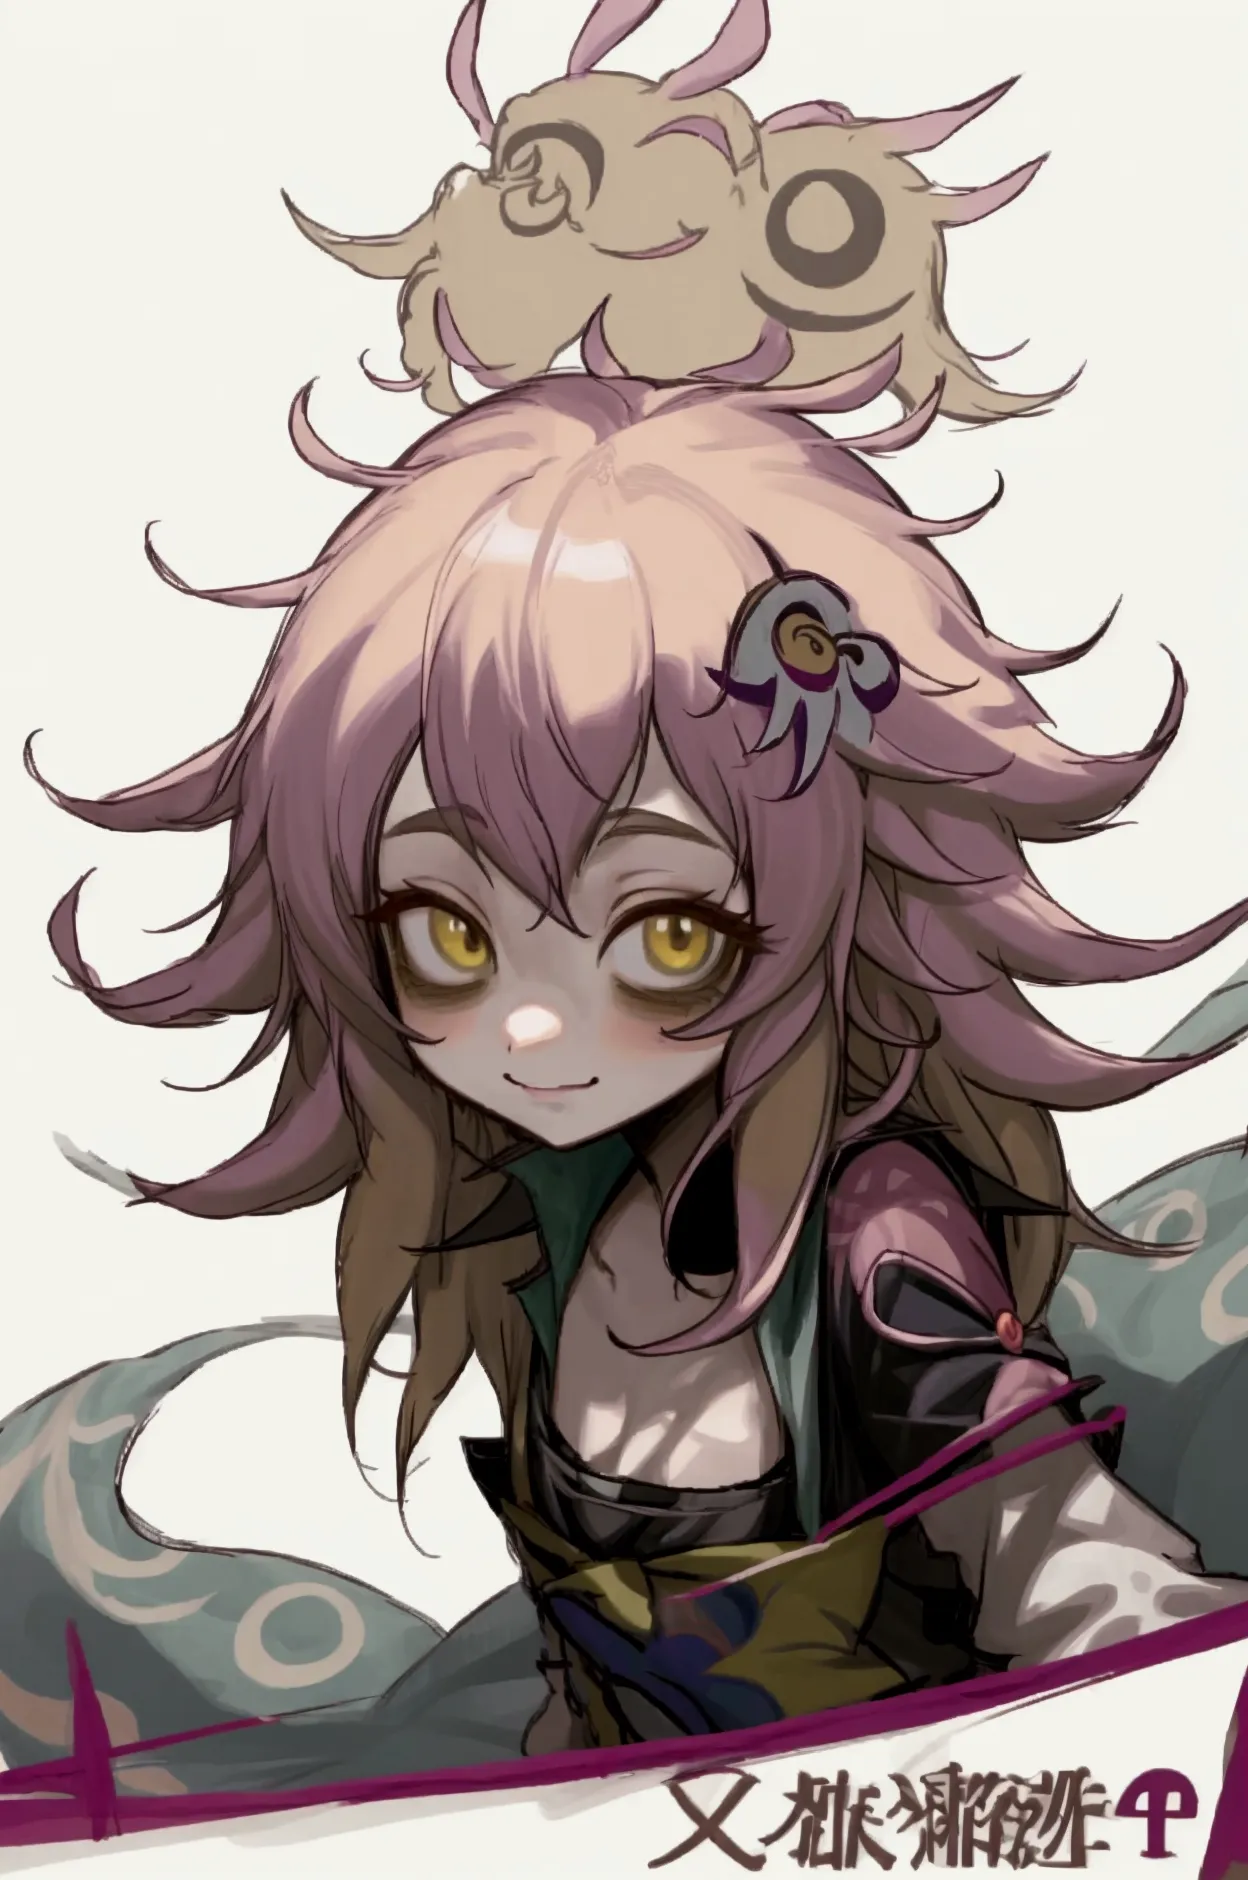 Neeko anime girl with blonde hair and yellow eyes looking at the camera., Stop four *, Junko Enoshima, Moe anime art style, in a...